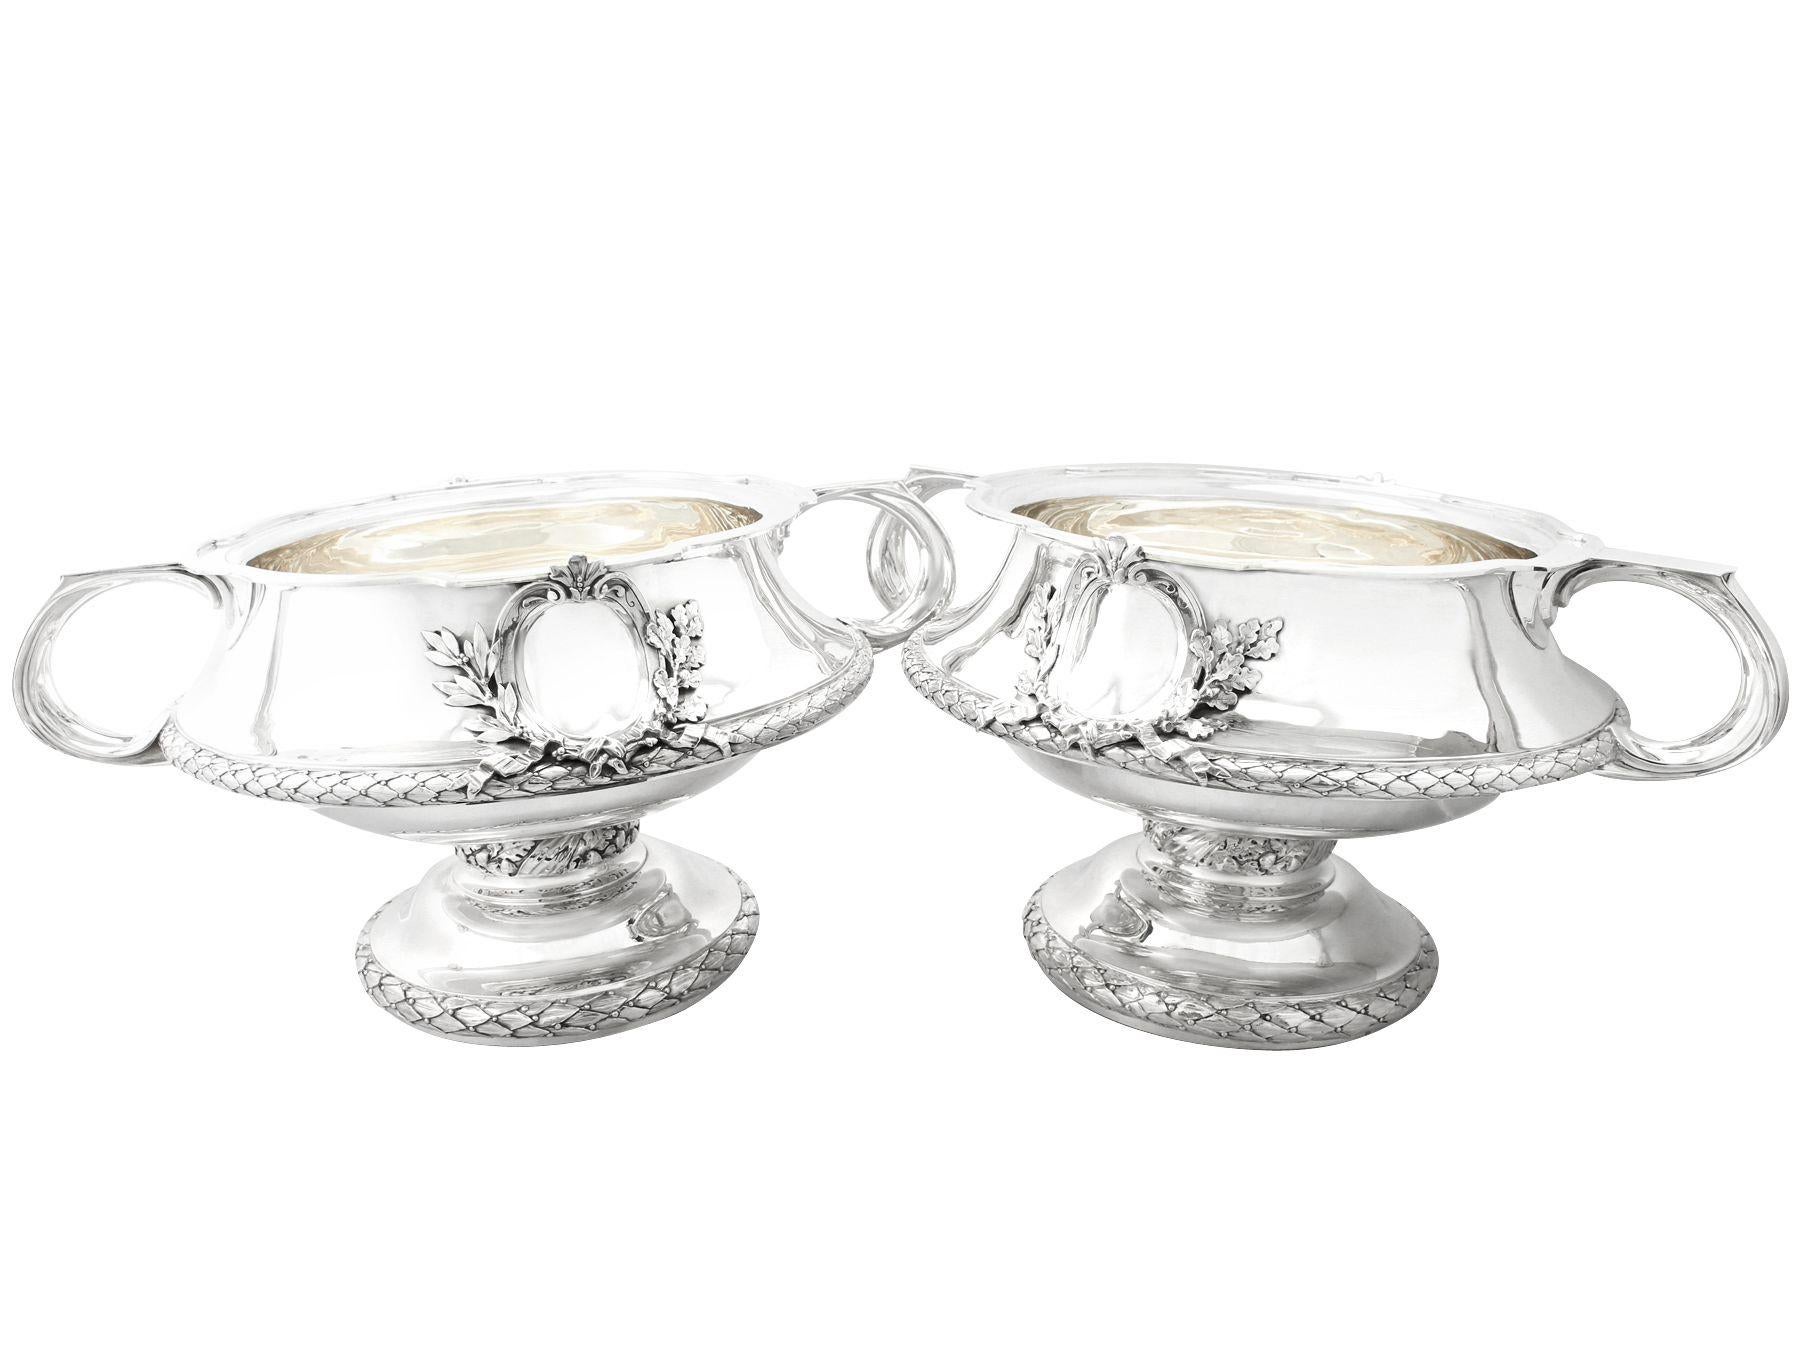 A magnificent, fine and impressive, large pair of antique George V English sterling silver bowls / centrepieces in the Art Nouveau style, an addition to our presentation silverware collection.

These magnificent and large antique George V English